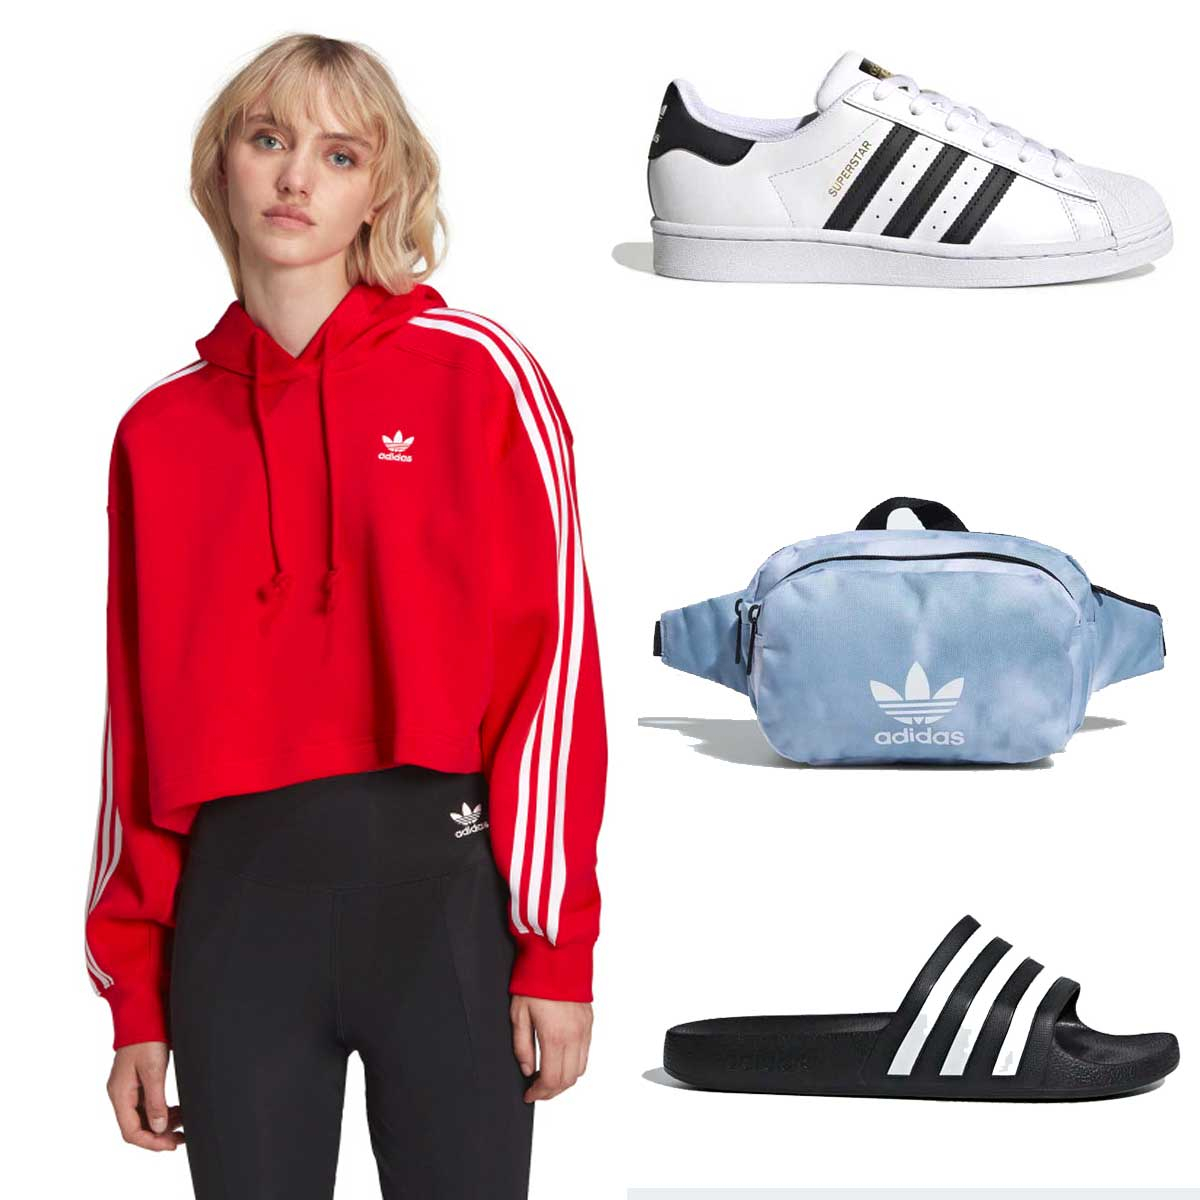 https://akns-images.eonline.com/eol_images/Entire_Site/2022819/rs_1200x1200-220919100002-1200-adidas-ecomm.cm.91922.jpg?fit=around%7C1200:1200&output-quality=90&crop=1200:1200;center,top